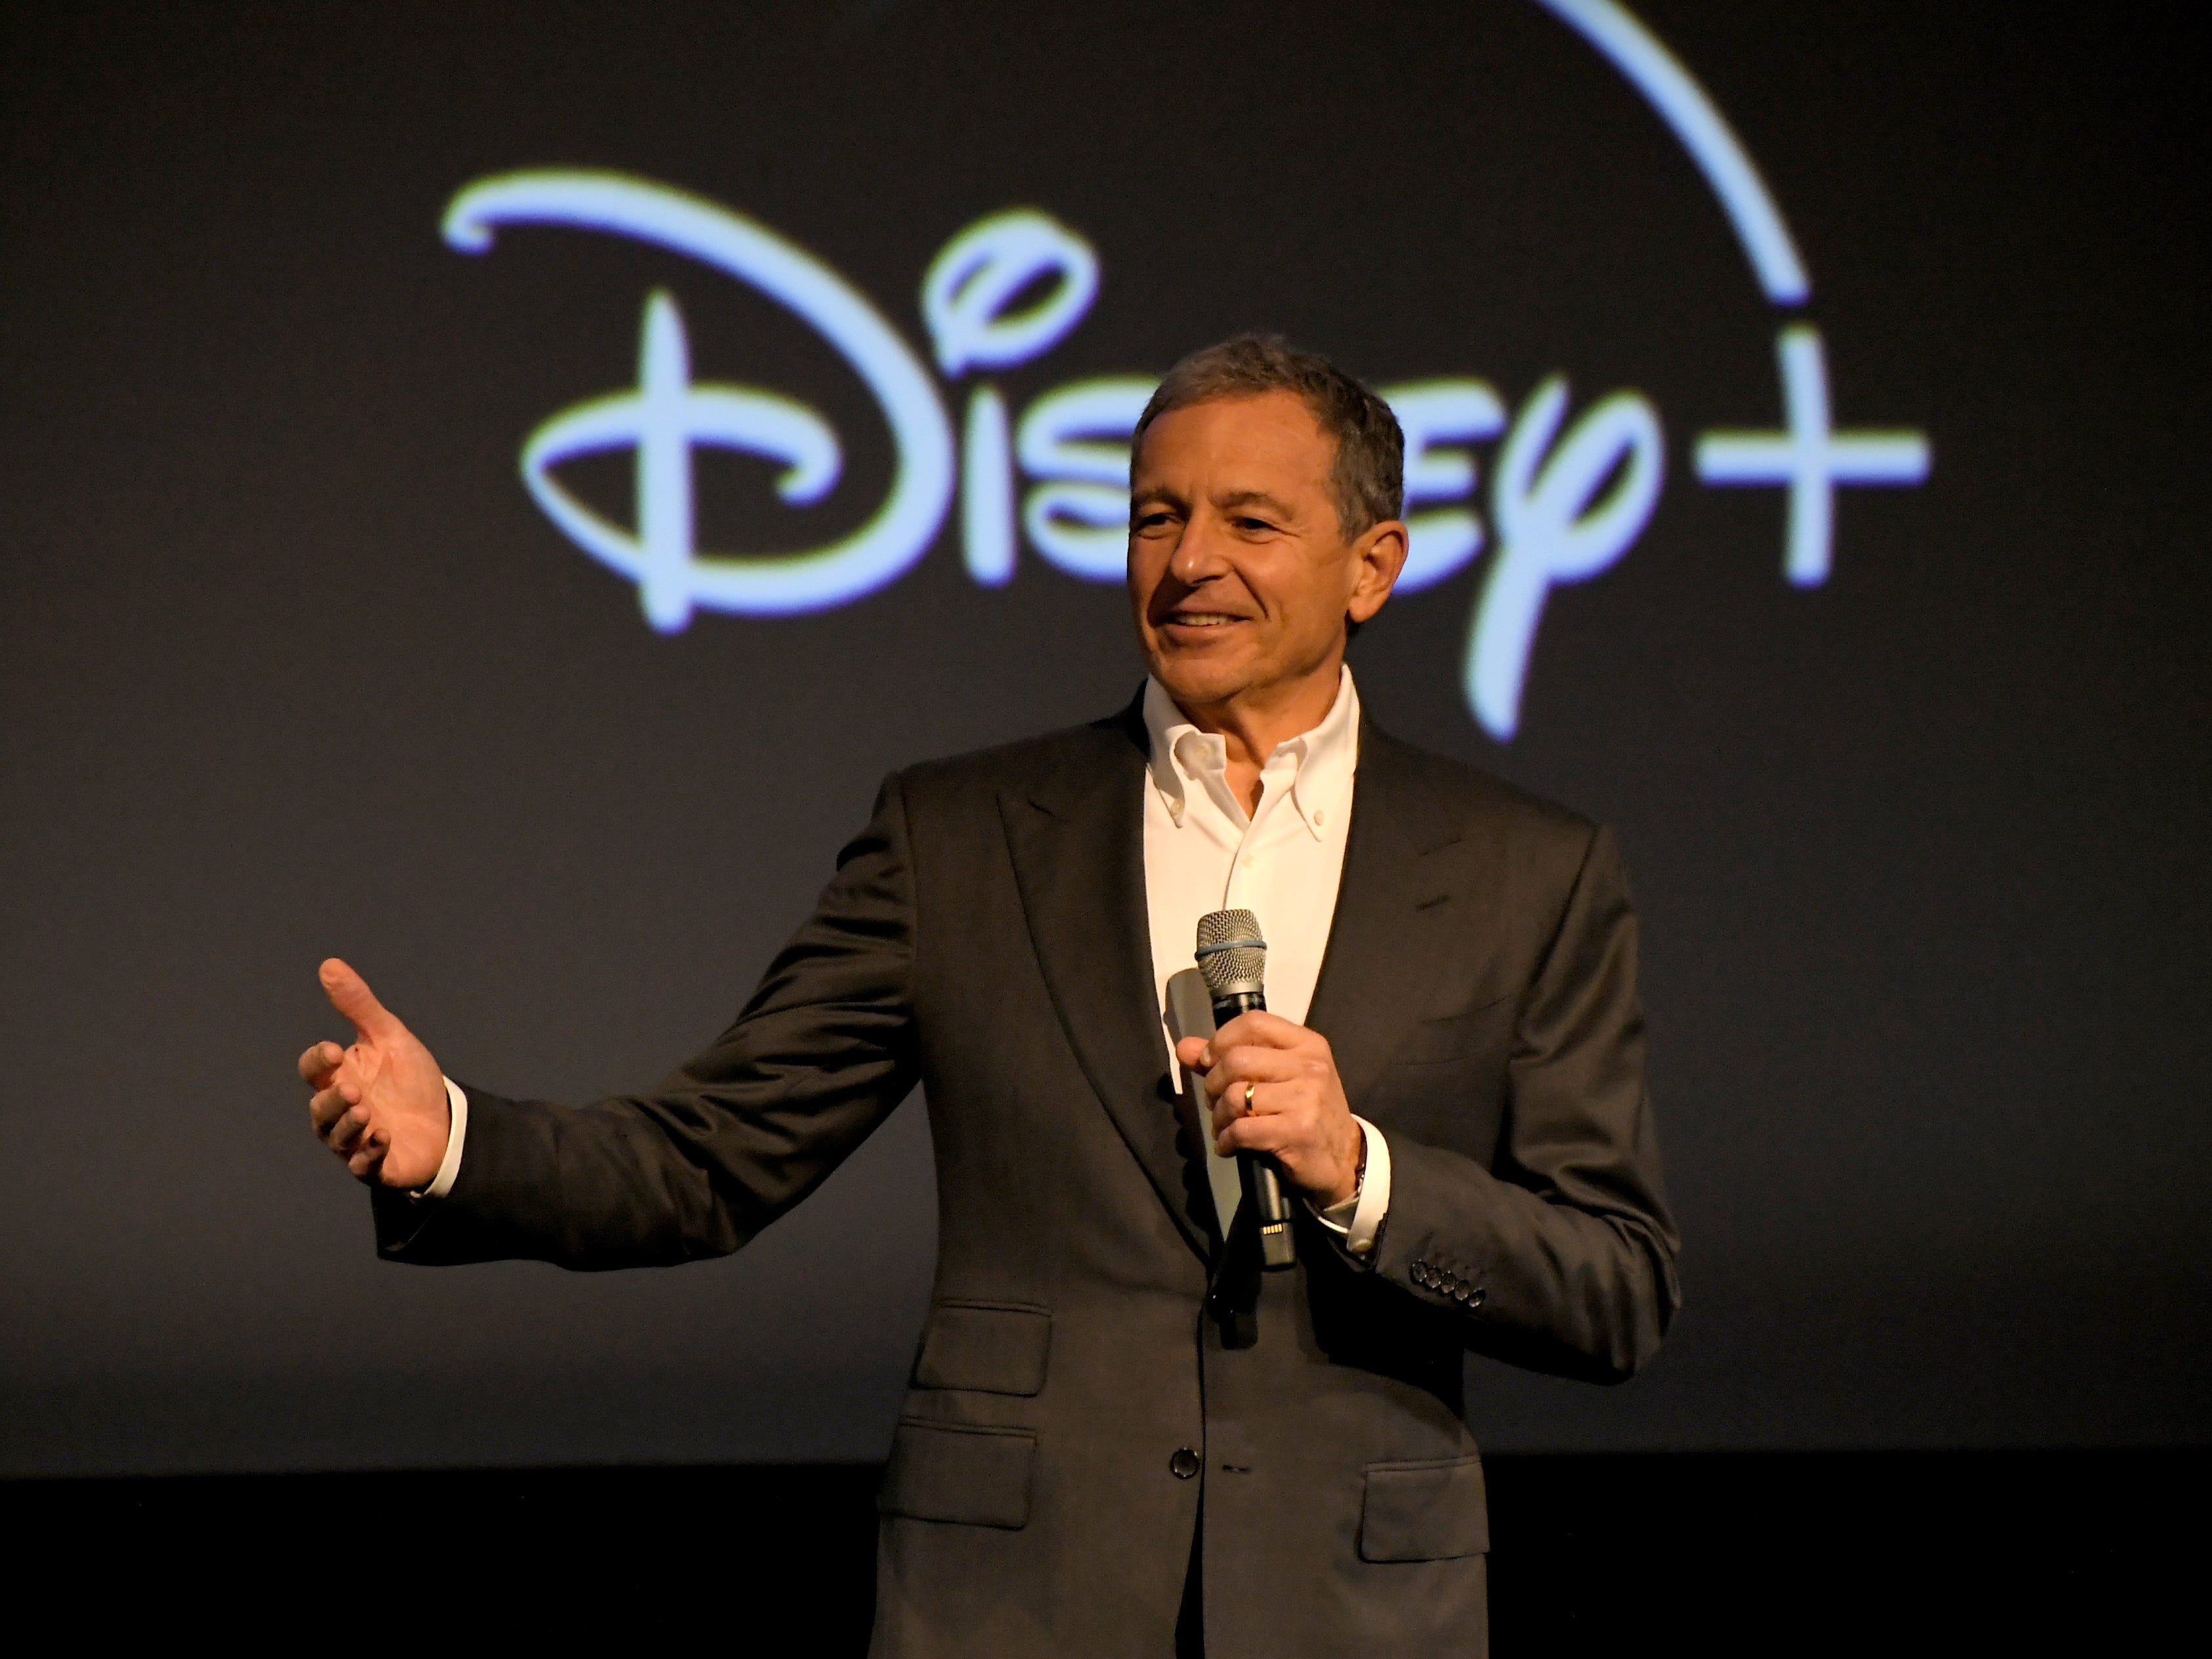 <p>Fresh off his return as Disney CEO, Bob Iger announced on February 8 that <a href="https://www.businessinsider.com/disney-layoffs-7000-jobs-to-be-cut-2023-2">Disney will slash 7,000 jobs</a> as the company looks to reduce costs. </p><p>Iger, who returned to the position in November 2022 to replace his successor Bob Chapek after first leaving in 2020, told investors the cuts are part of an effort to help save an estimated $5.5 billion. </p><p>"While this is necessary to address the challenges we are facing today, I do not make this decision lightly," <a href="https://seekingalpha.com/article/4576588-walt-disney-company-dis-q1-2023-earnings-call-transcript" rel="noopener">Iger said</a>. "I have enormous respect and appreciation for the talent and dedication of our employees worldwide and I am mindful of the personal impact of these changes."</p>